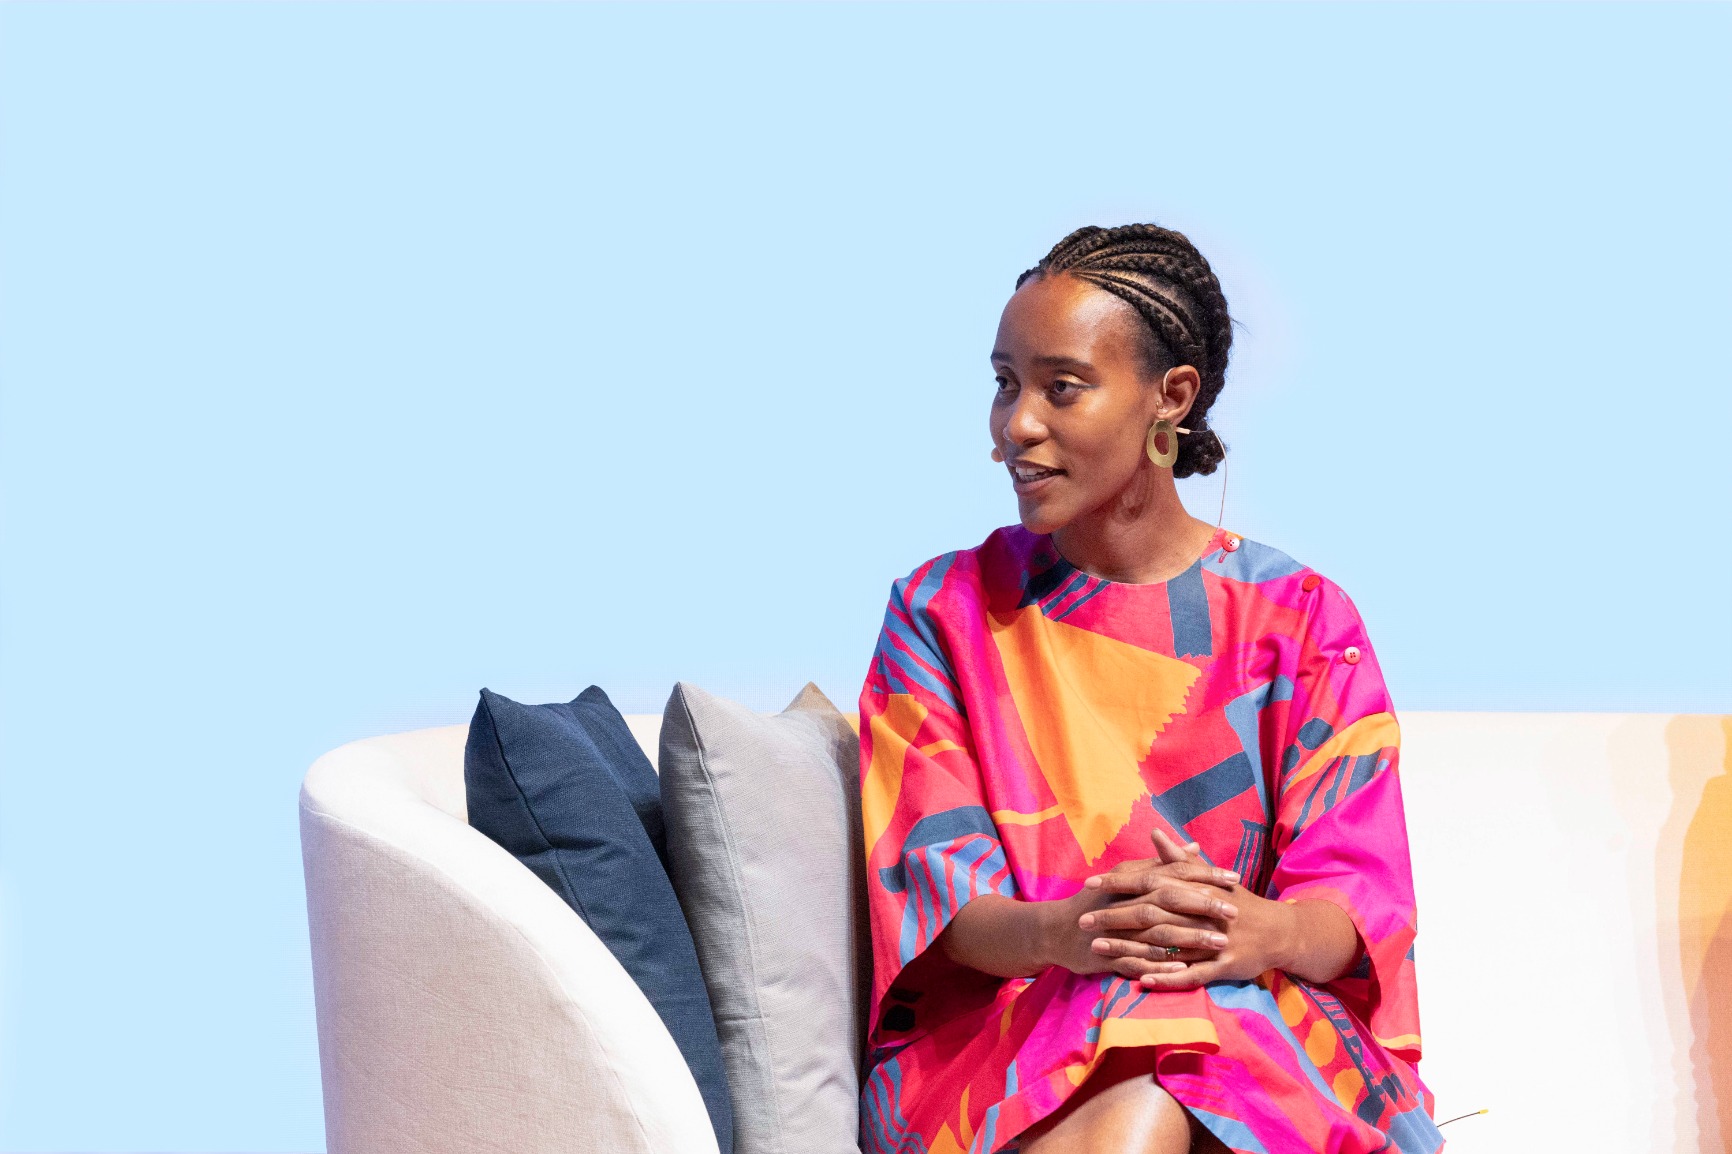 Photo of Khensani Jurczok-de Klerk sitting on a white couch speaking, wearing a bright colourful dress. The colours are pink, orange and blue. She has braids.